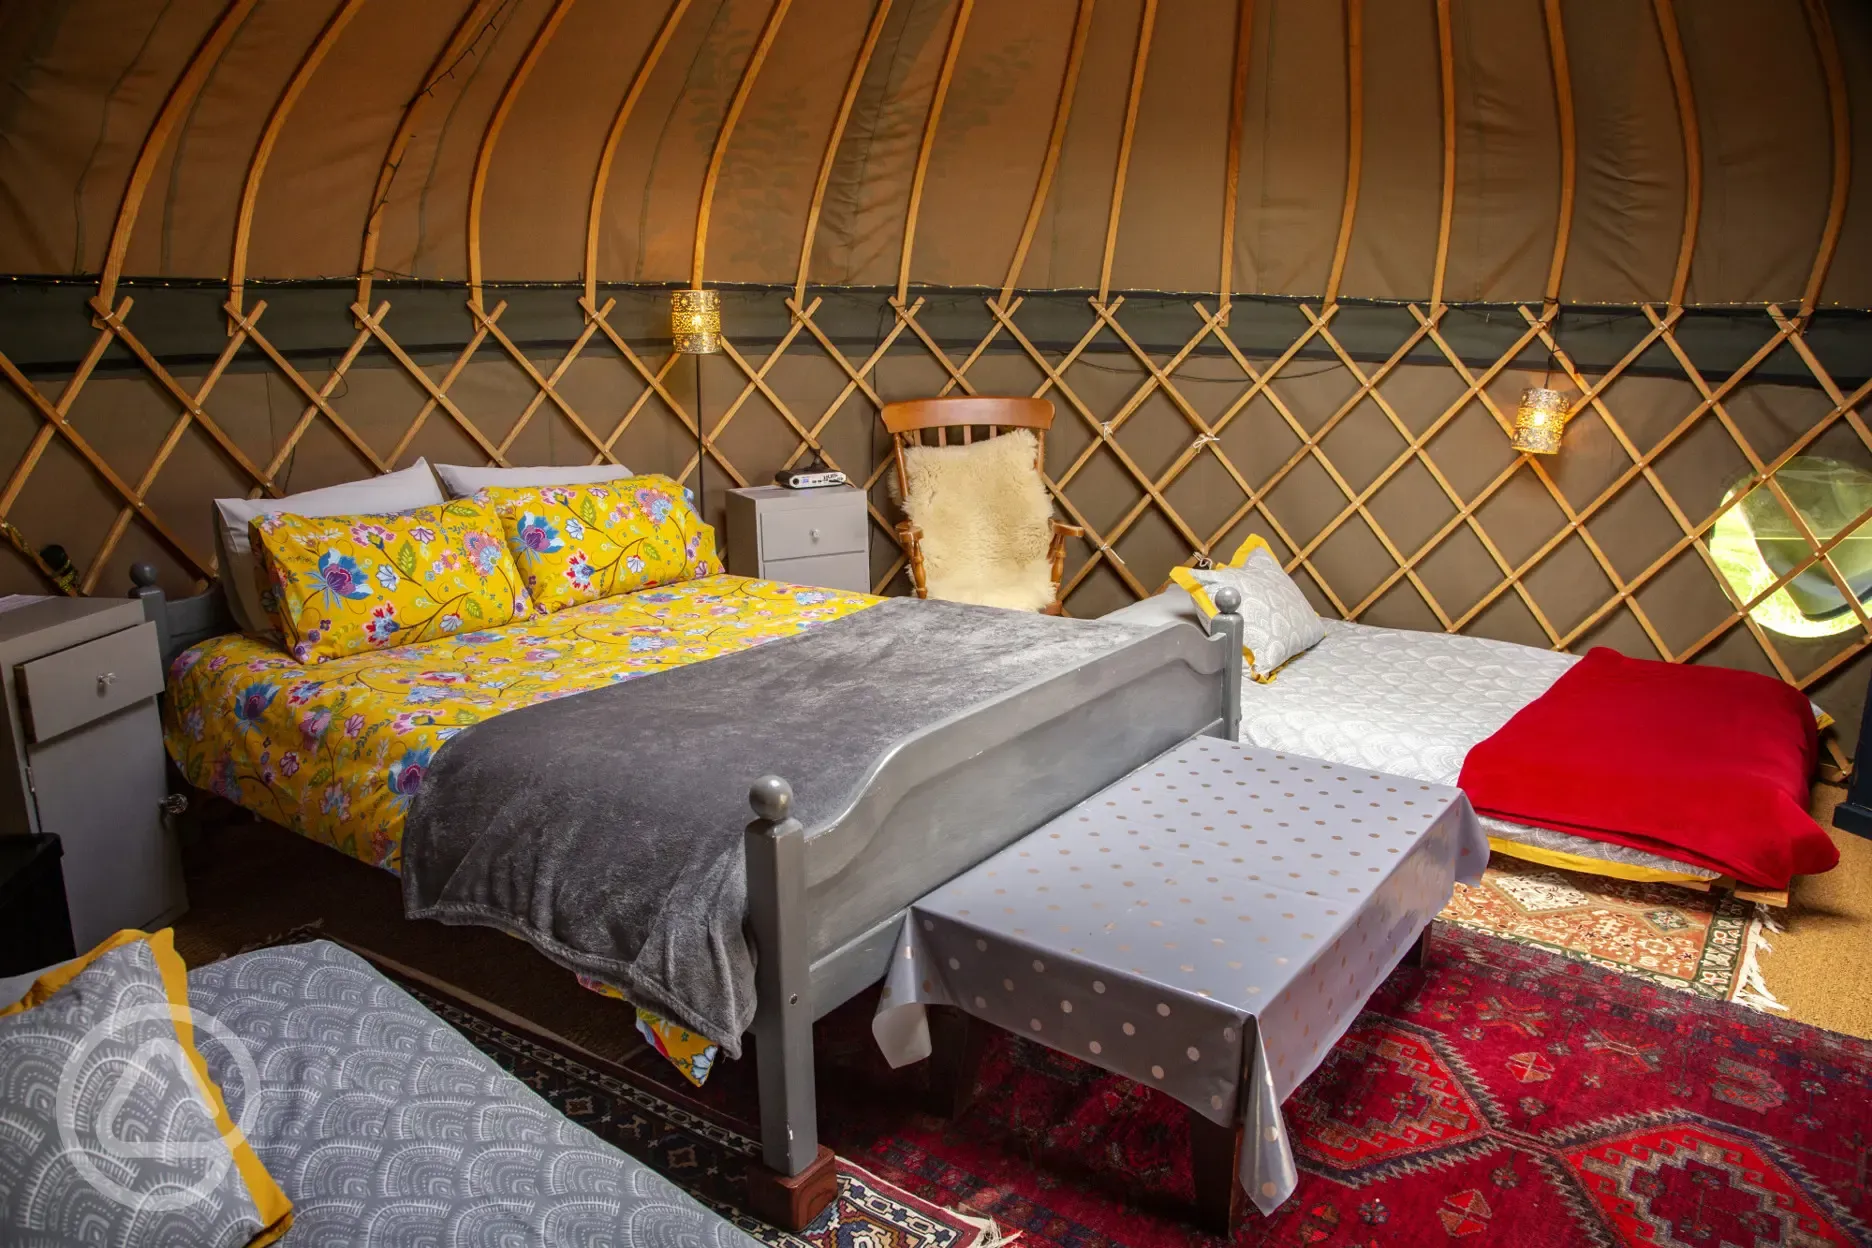 King size bed in daisy Yurt, comfy chair and sheepskin rug